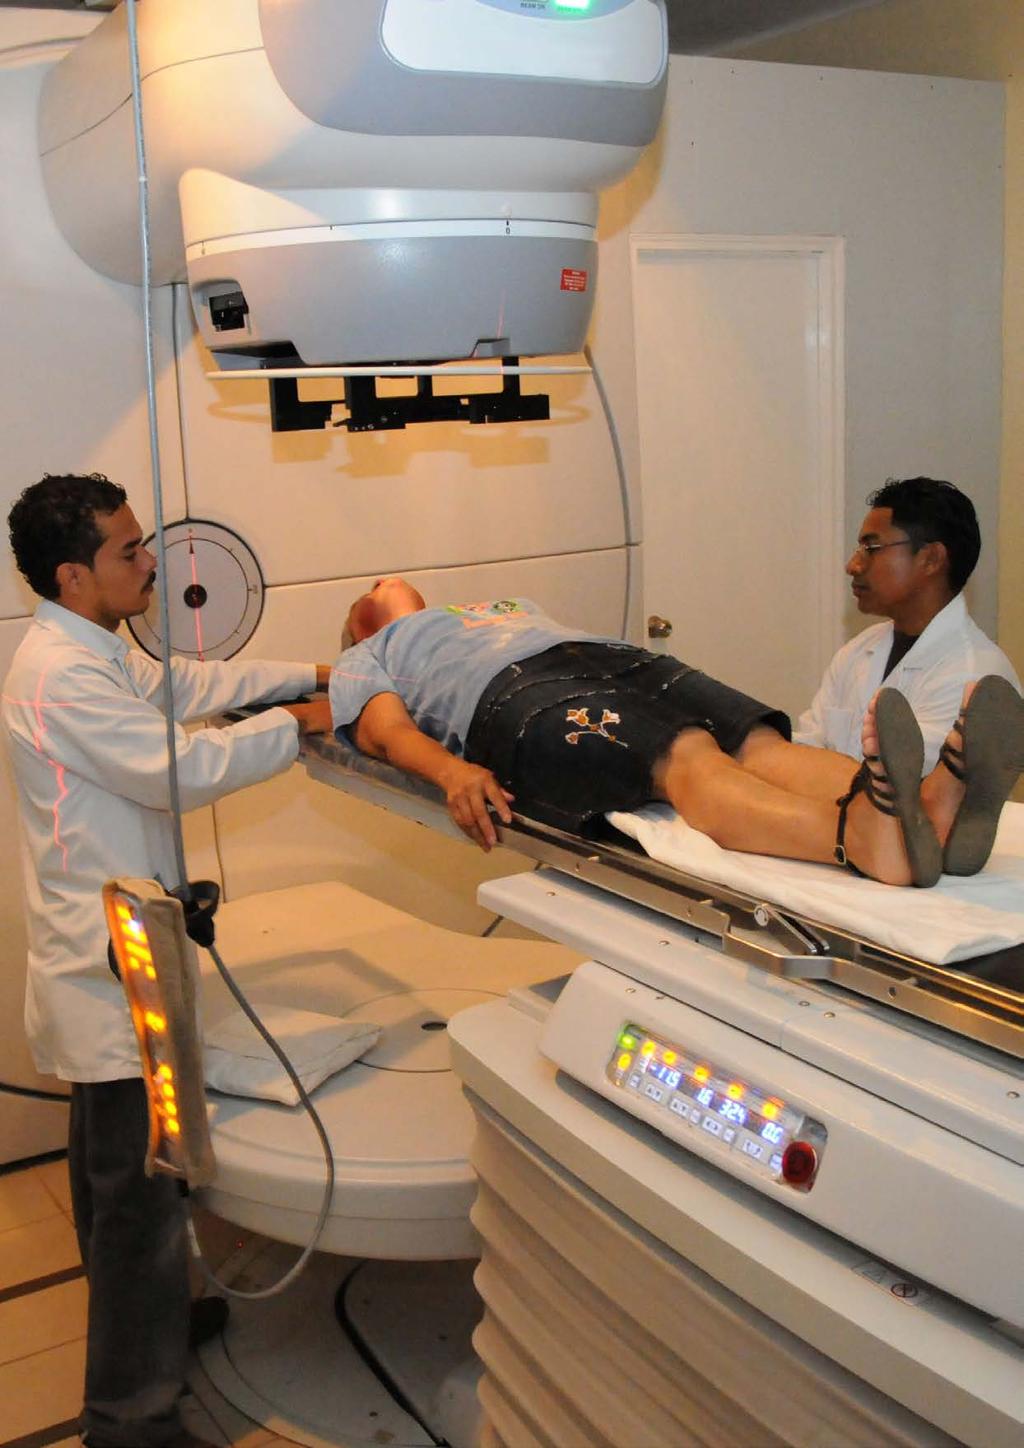 A patient is treated with radiotherapy at the Centro Nacional de Radioterapia in Managua, Nicaragua.